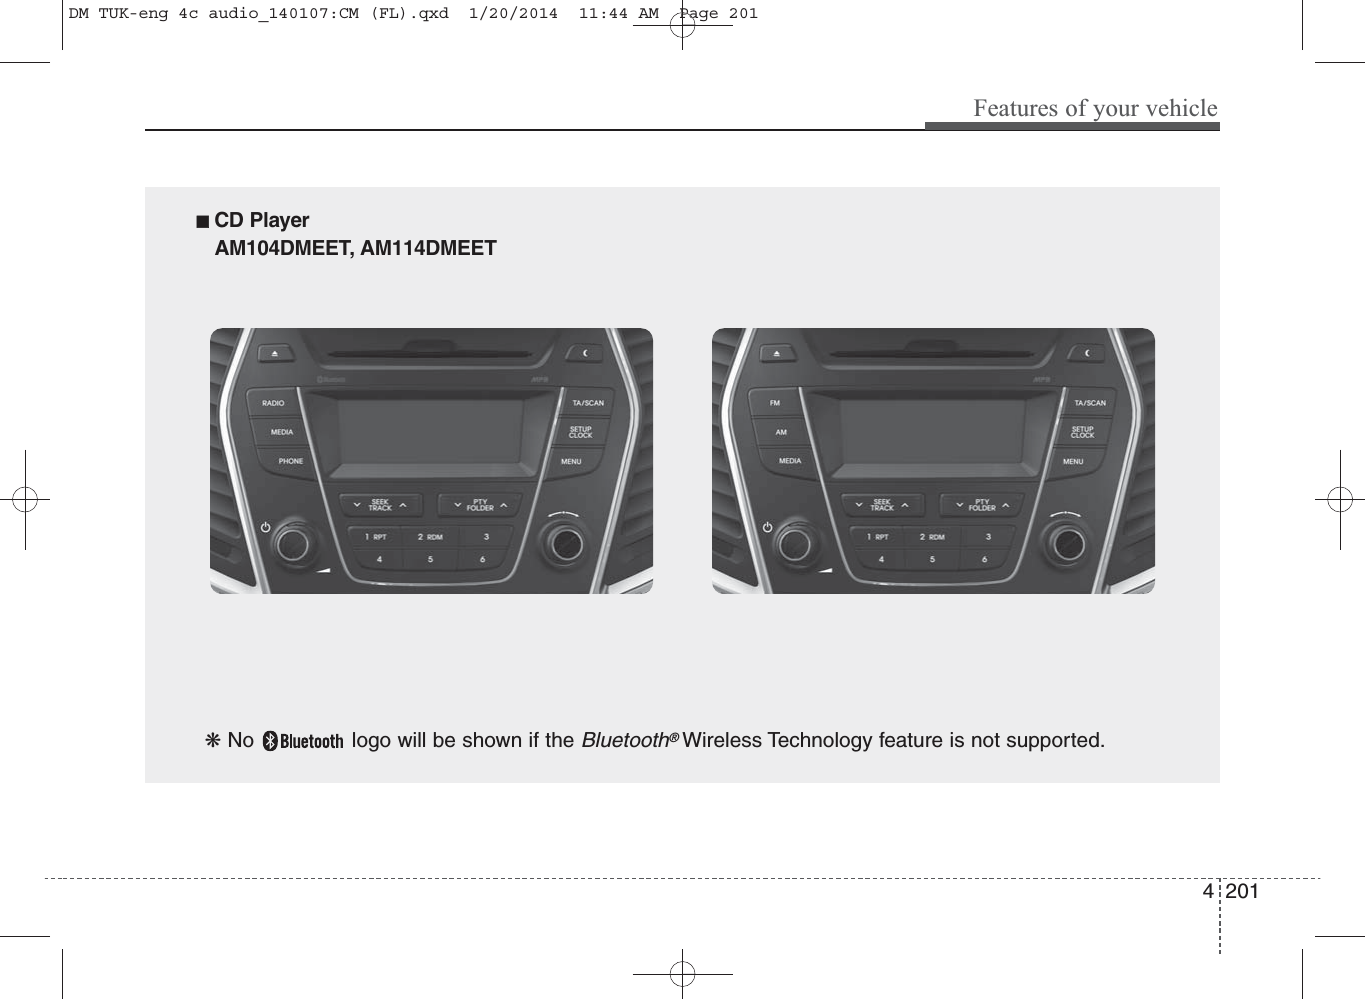 4 201Features of your vehicle■ CD Player AM104DMEET, AM114DMEET❋ No  logo will be shown if the Bluetooth®Wireless Technology feature is not supported.DM TUK-eng 4c audio_140107:CM (FL).qxd  1/20/2014  11:44 AM  Page 201